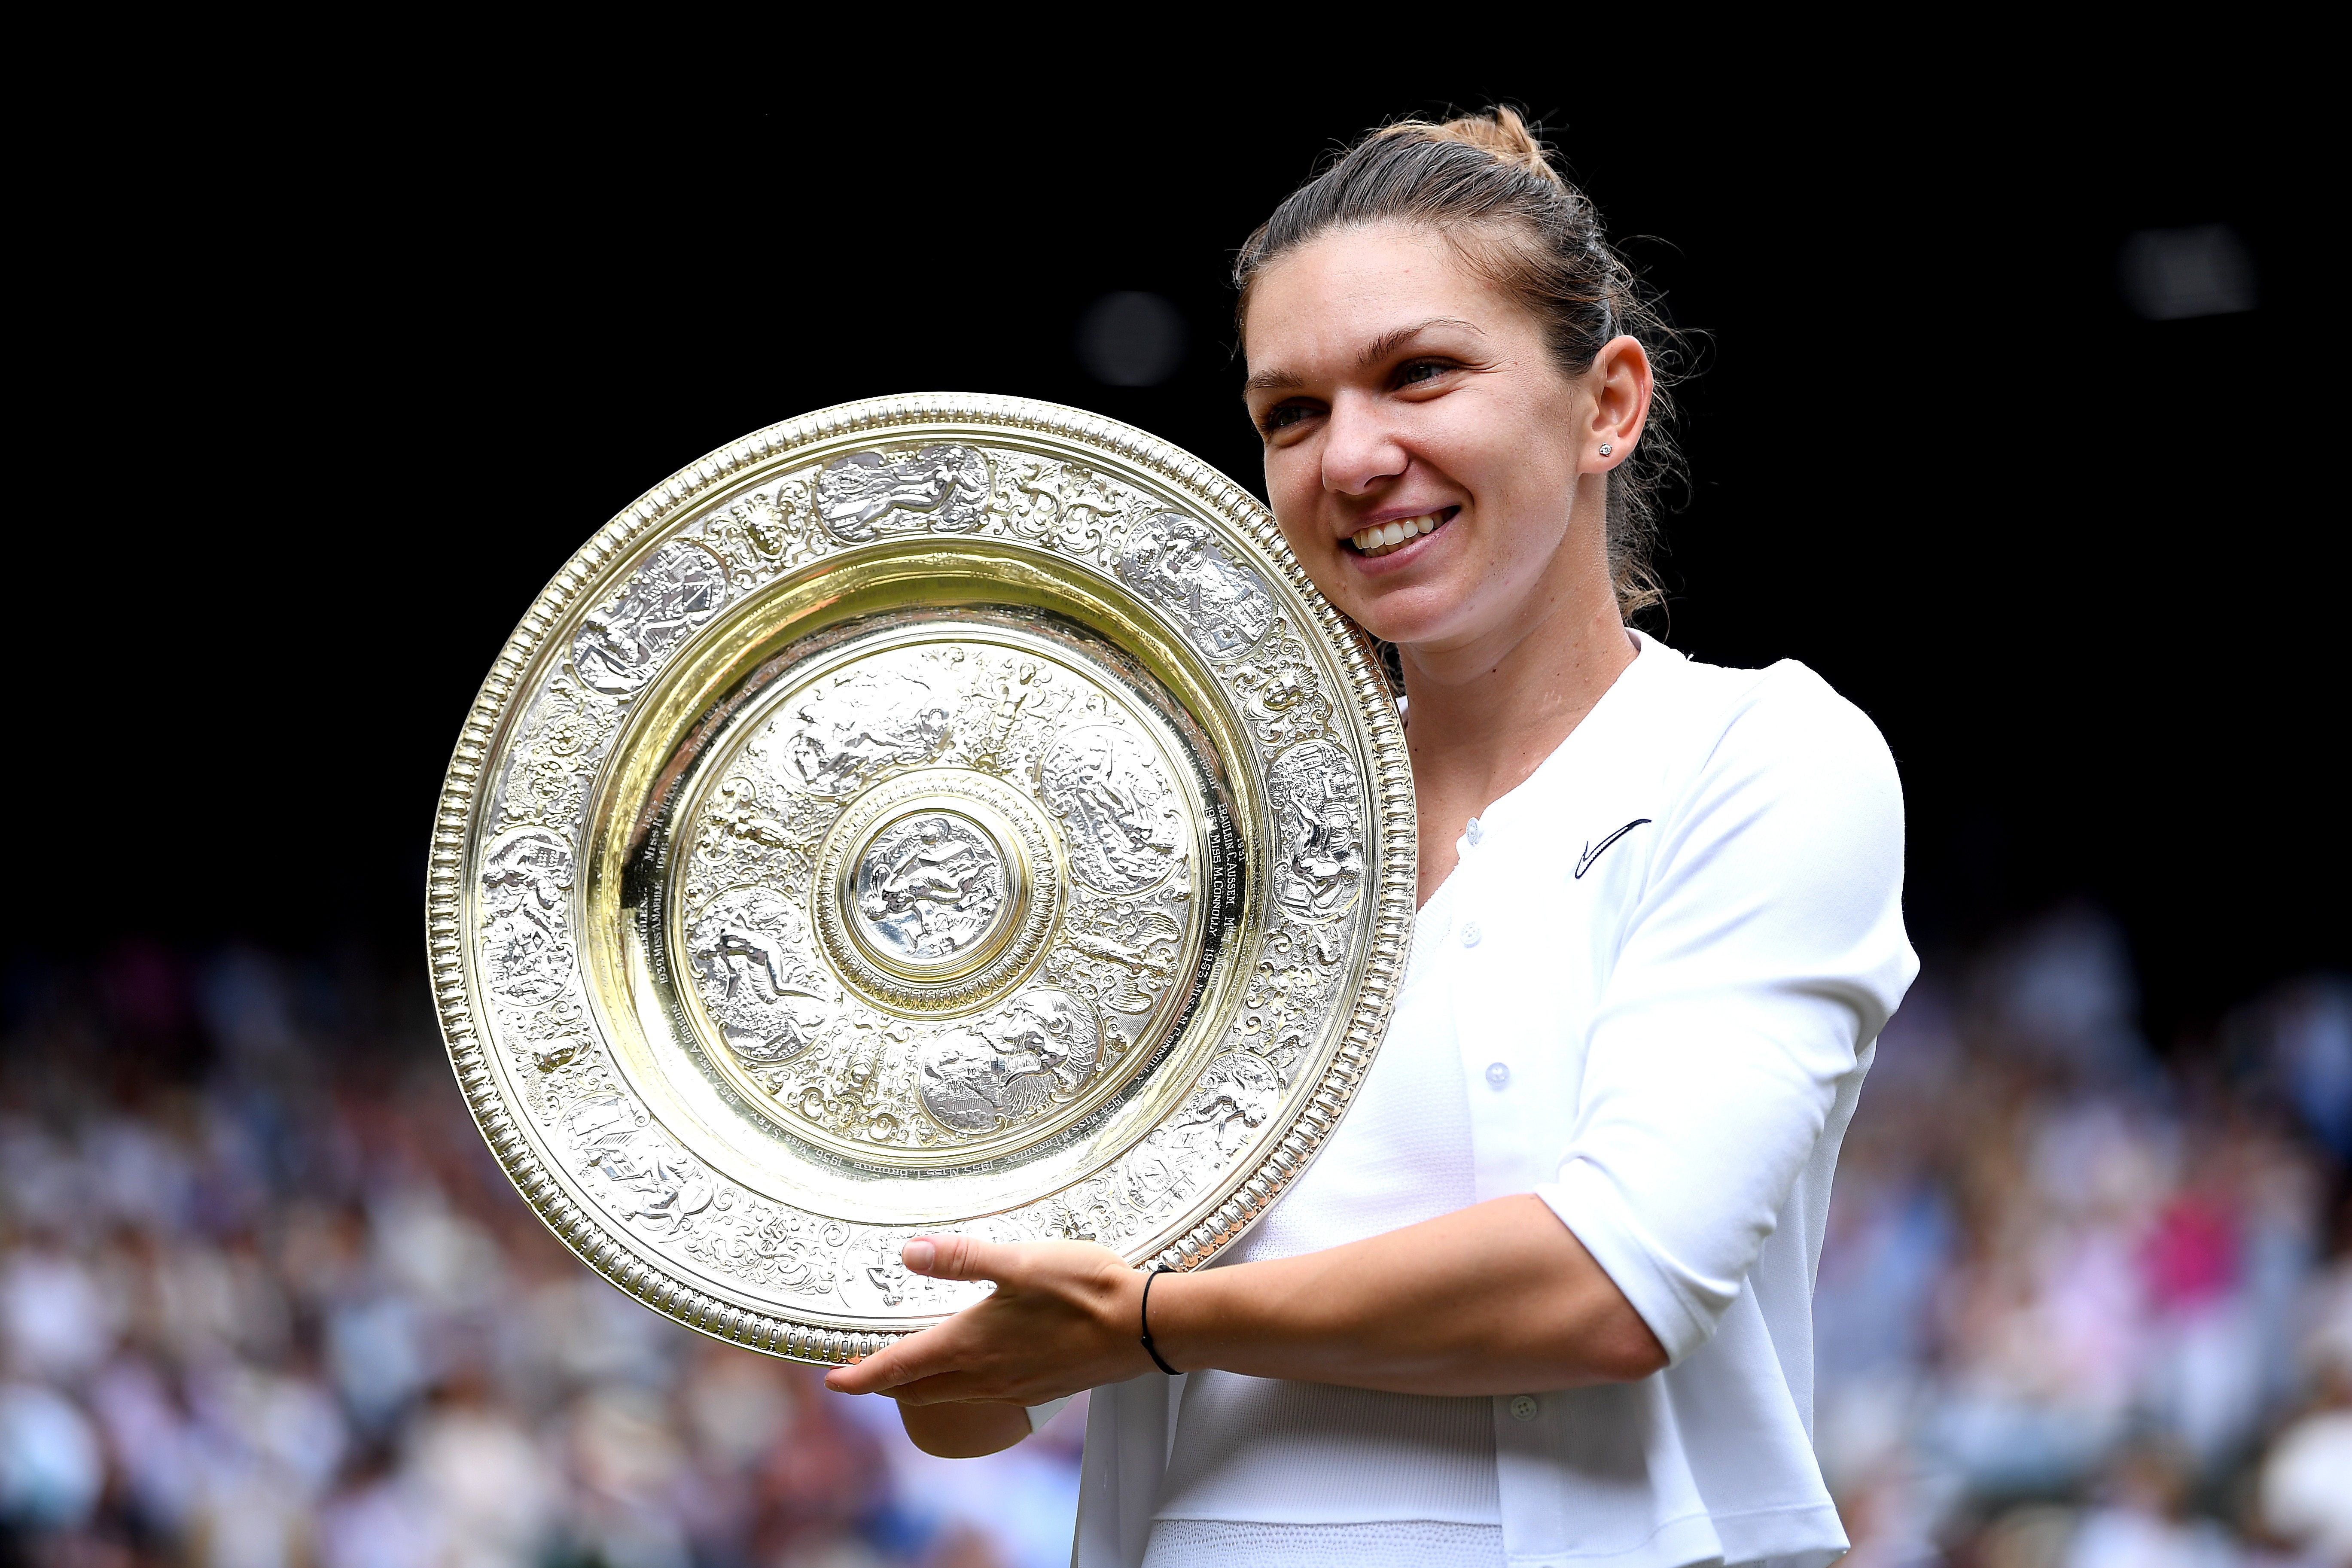 Simona Halep will hope to defend her Wimbledon title later this month